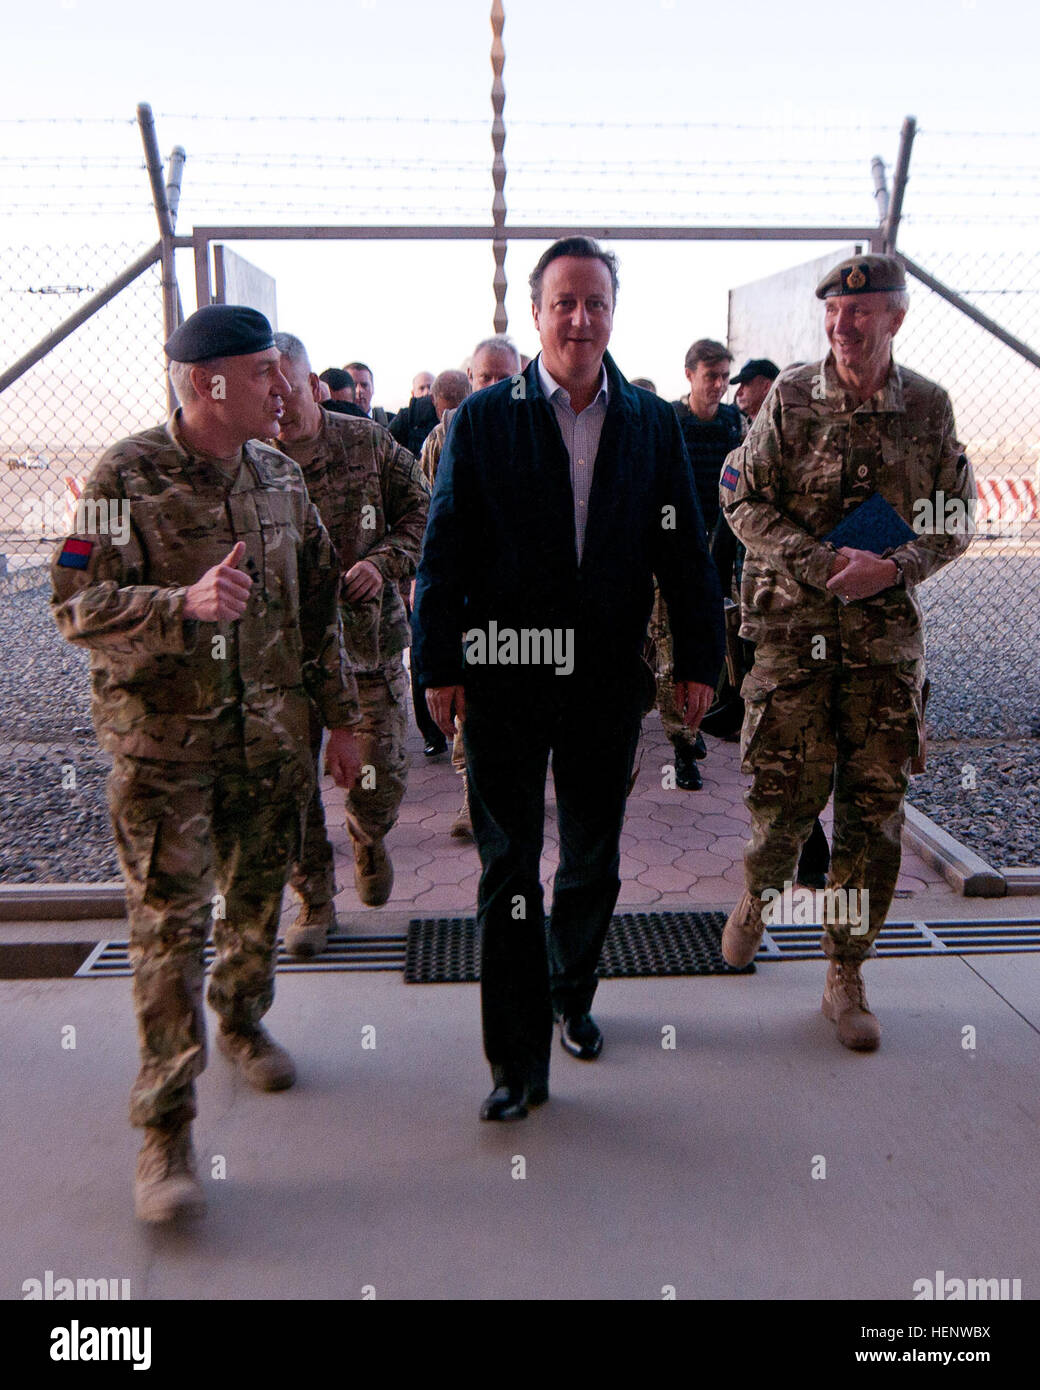 British Prime Minister David Cameron (center), British Maj. Gens. Richard Nugee, International Security Assistance Force Joint Command chief of staff (left) and Ben Bathurst, ISAF deputy advisor to the Afghan Ministry of Defense (right), walk into Kabul International Airport Oct. 3, 2014. During his surprise visit to Kabul, Cameron highlighted the success of British combat and training operations in Afghanistan. “They have done vital work here,” Cameron said. “We have trained up an effective Afghan army and police force. It has been hard, patient work.” British prime minister makes surprise vi Stock Photo